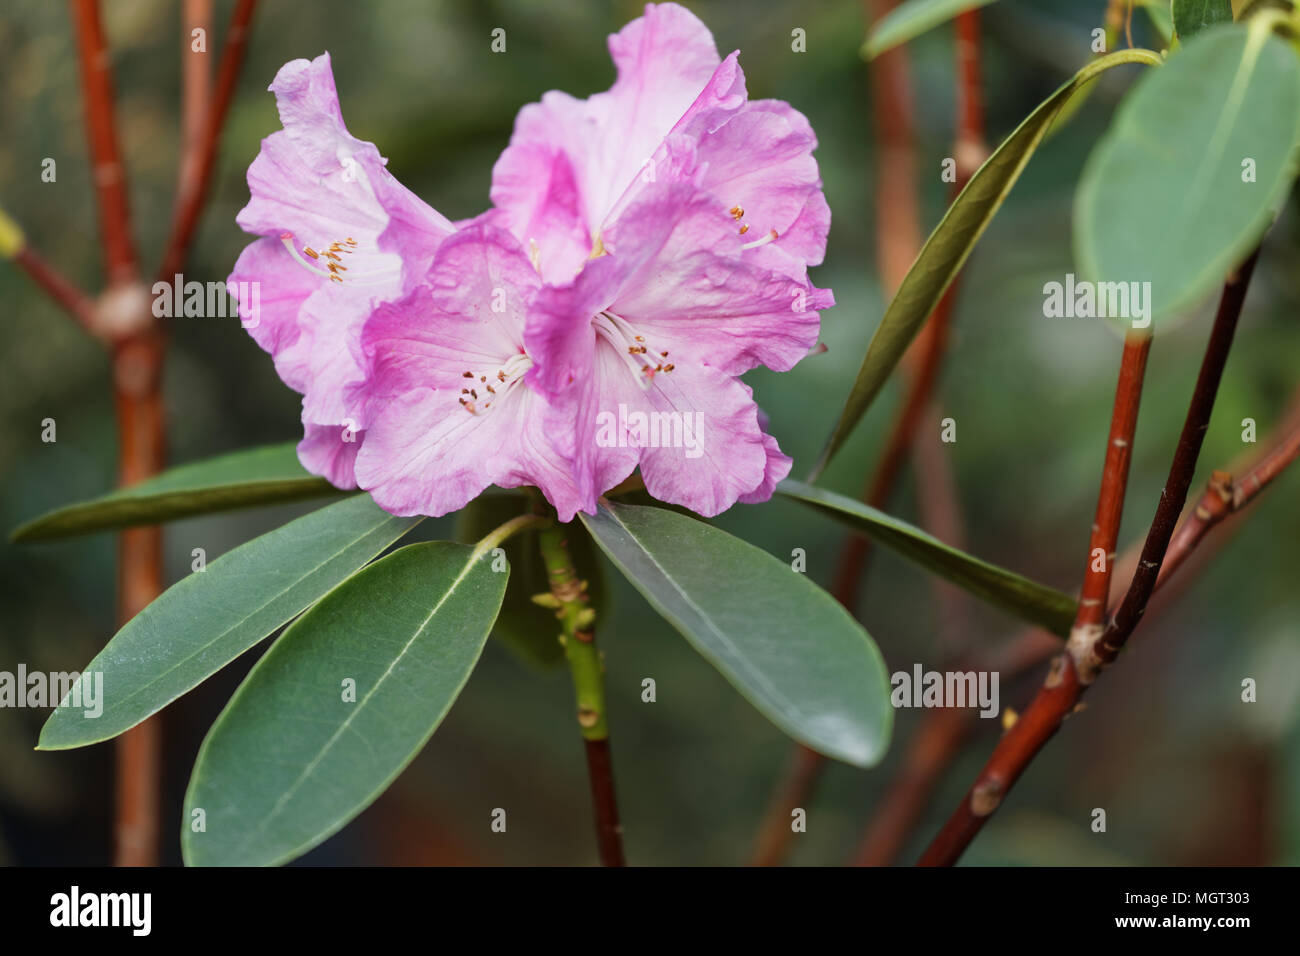 Blooming Rhododendron in a garden Stock Photo